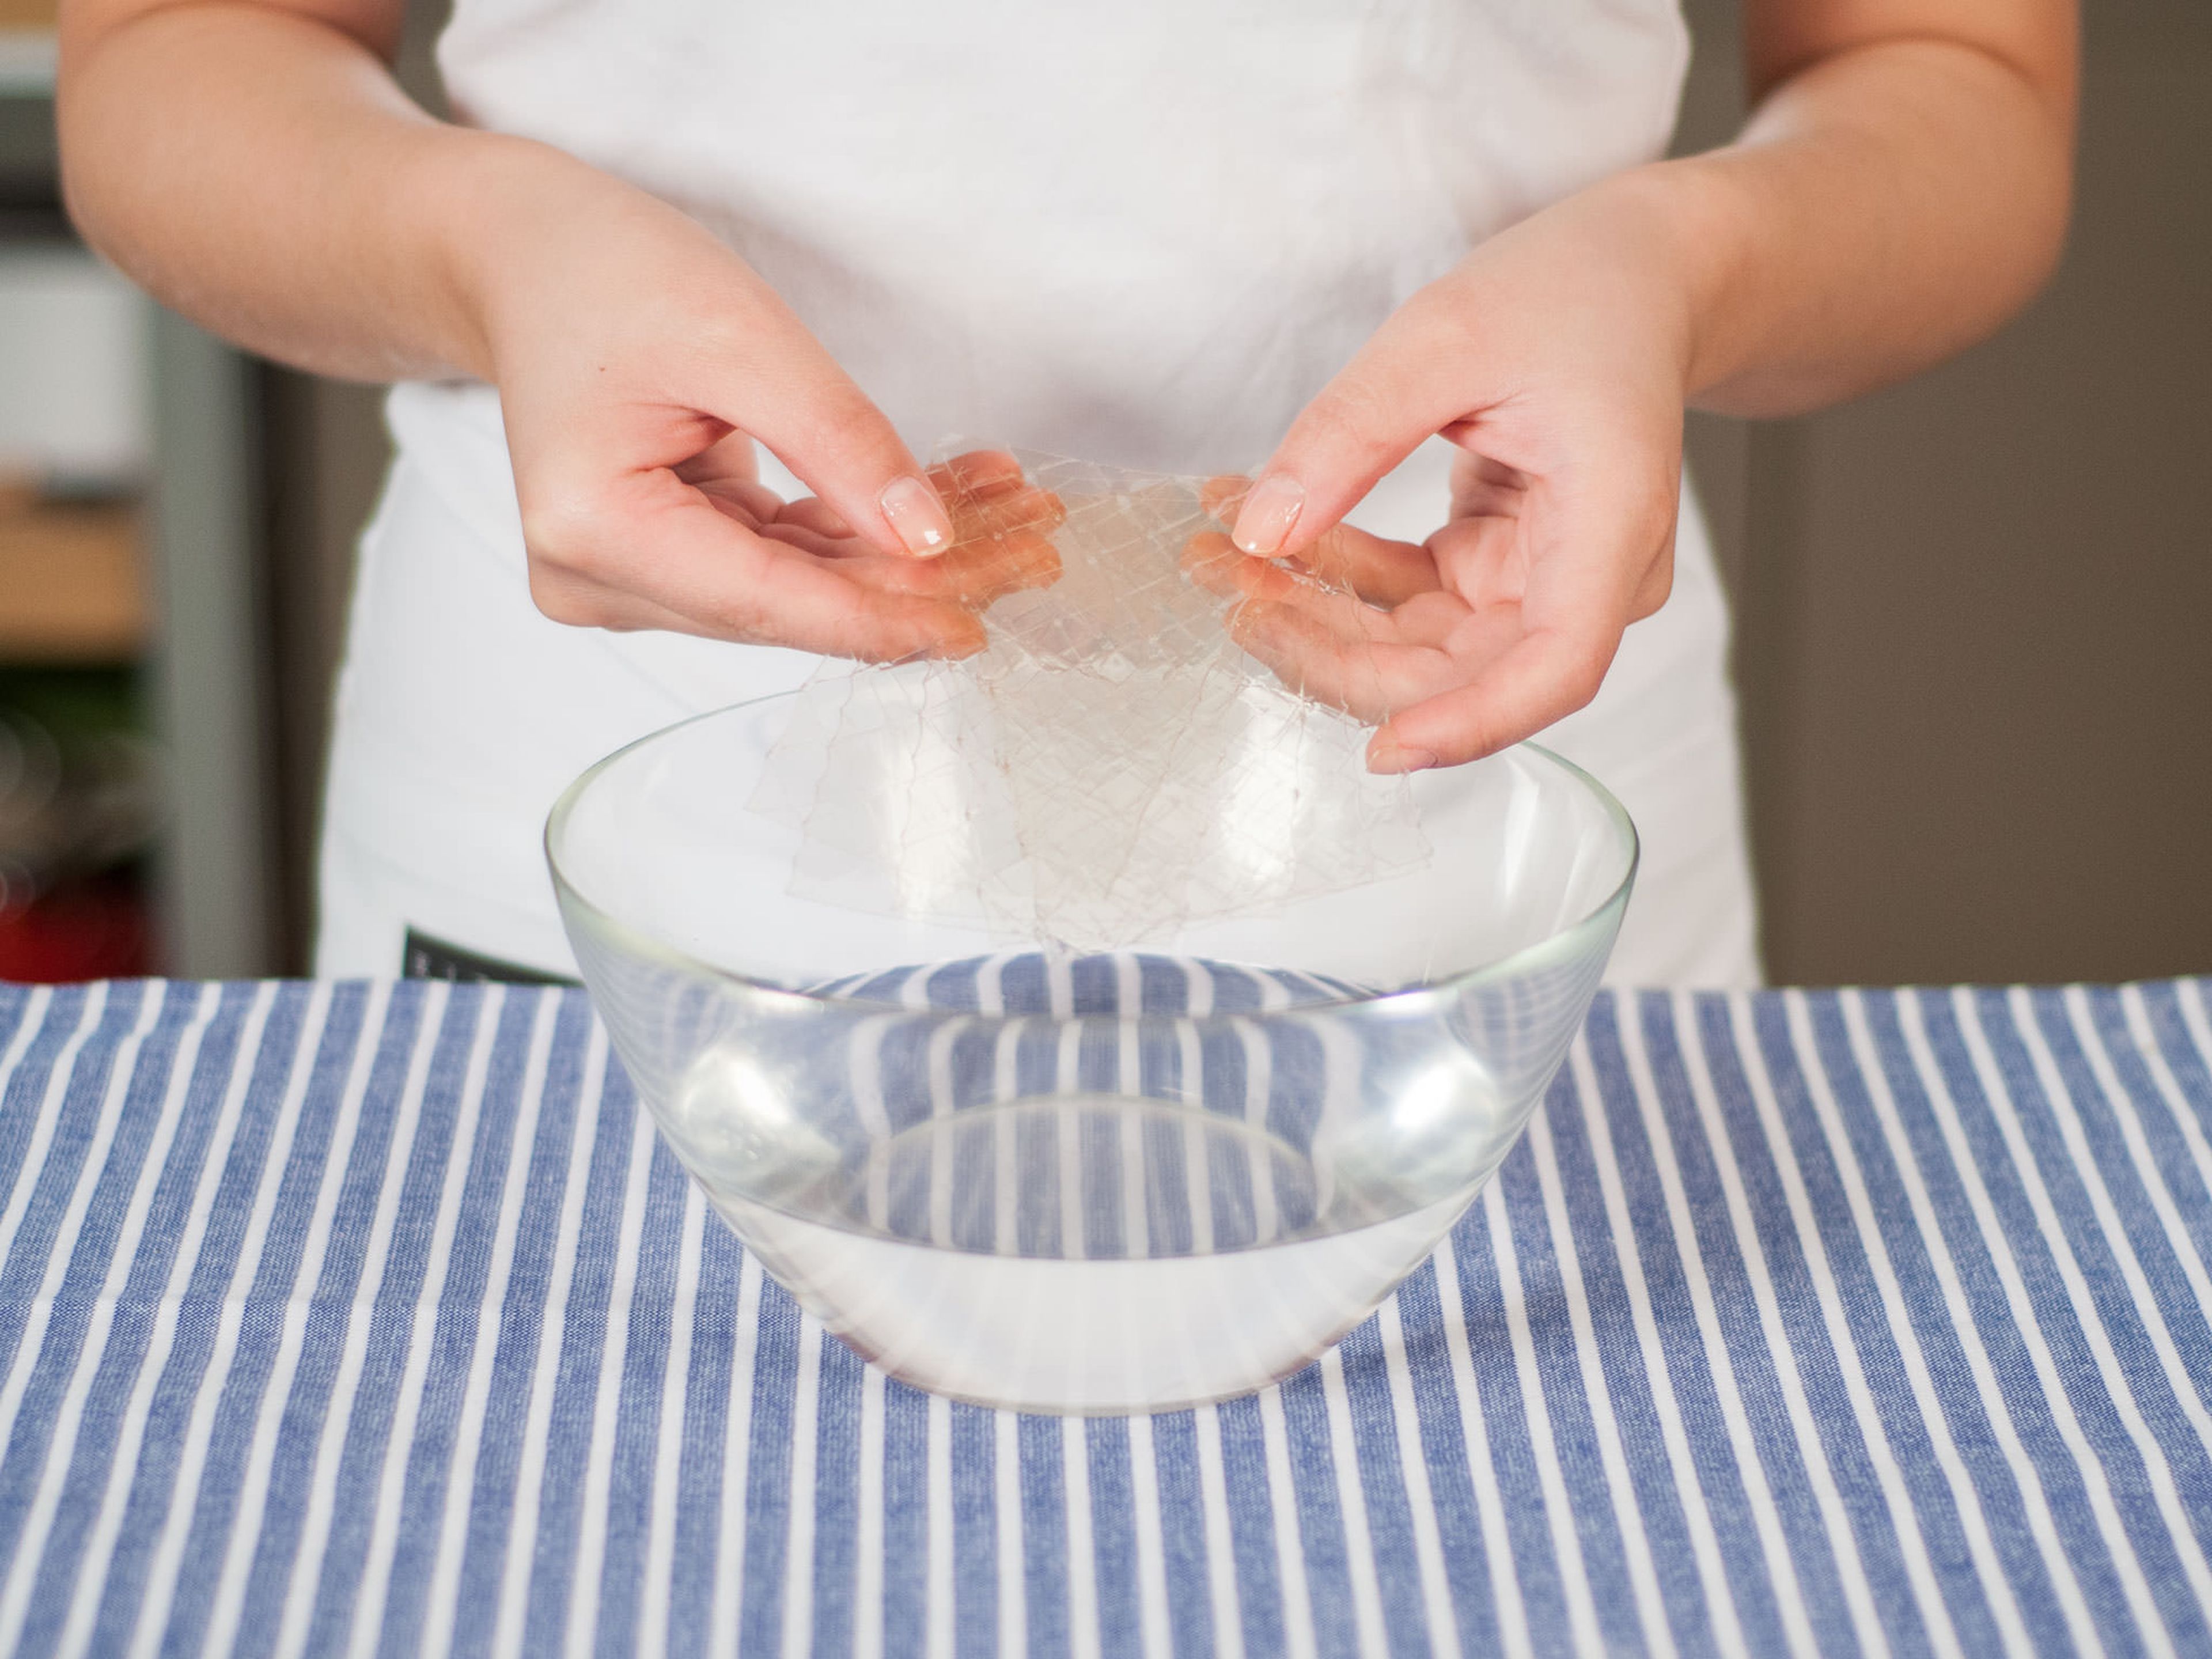 Add gelatin sheets to a bowl with some water. Leave to soak for approx. 8 – 12 min.